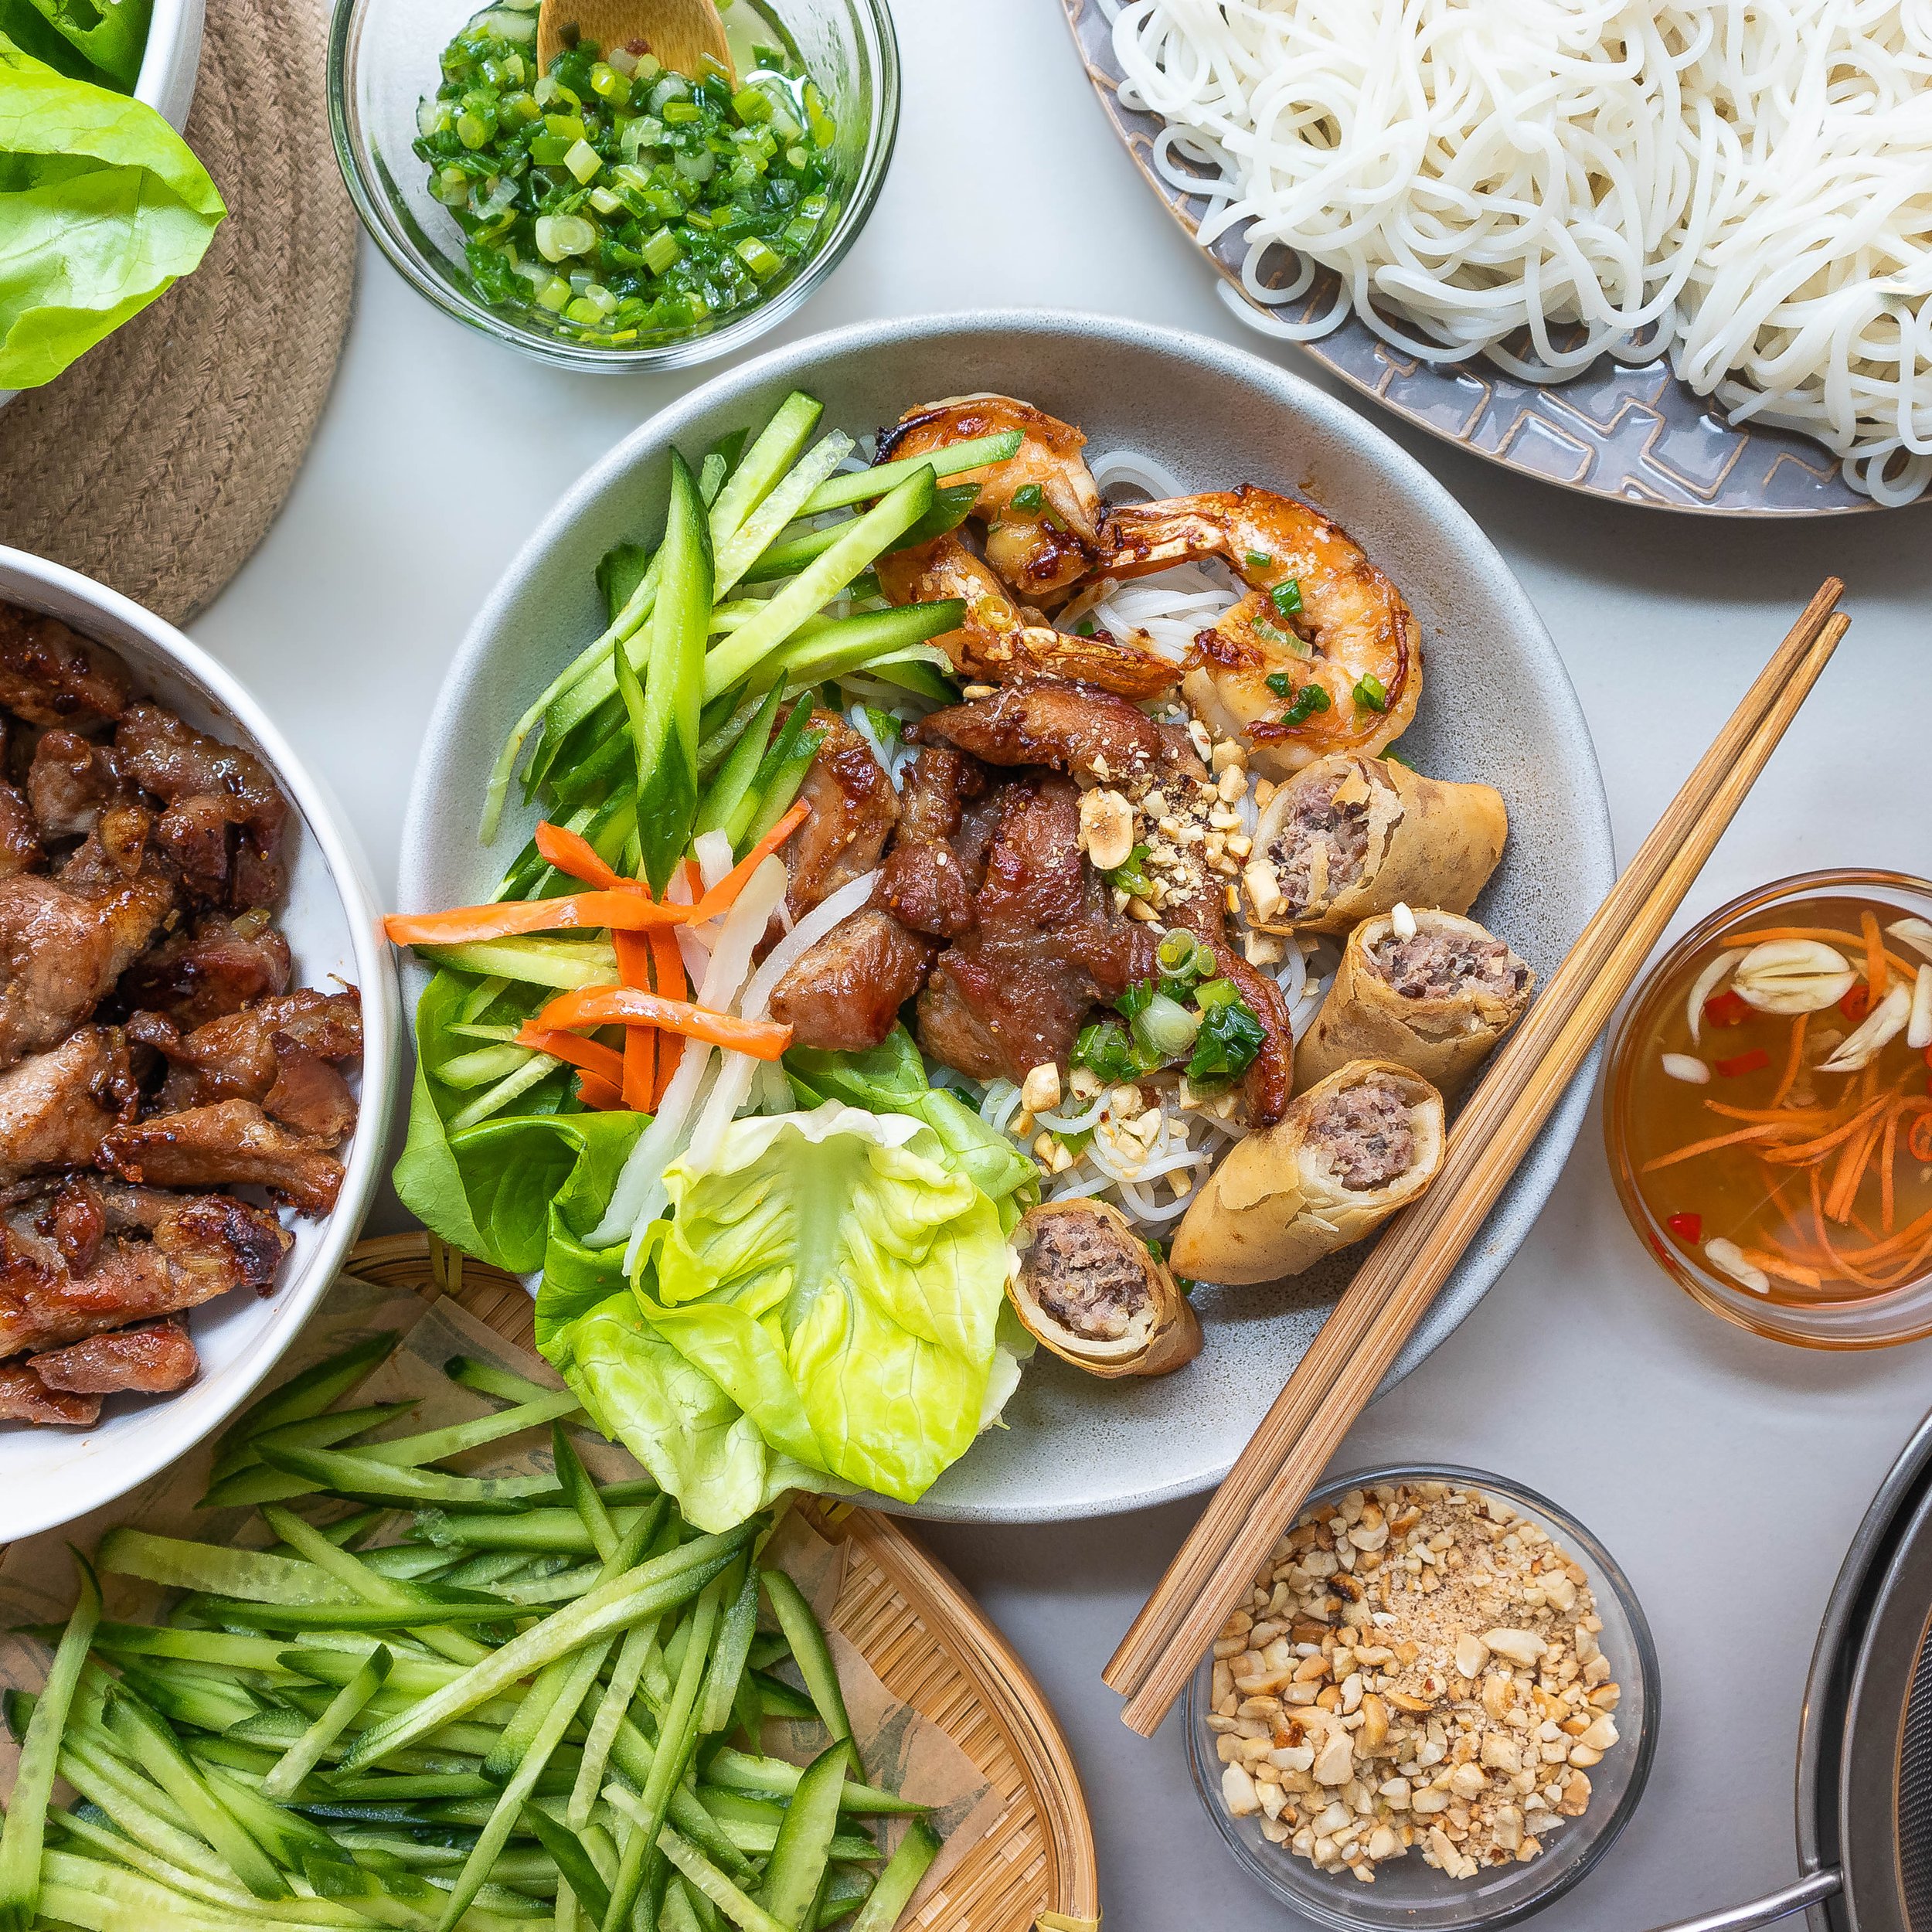 Bun Thit Nuong has grilled pork, noodles from Vietnam, and veggies